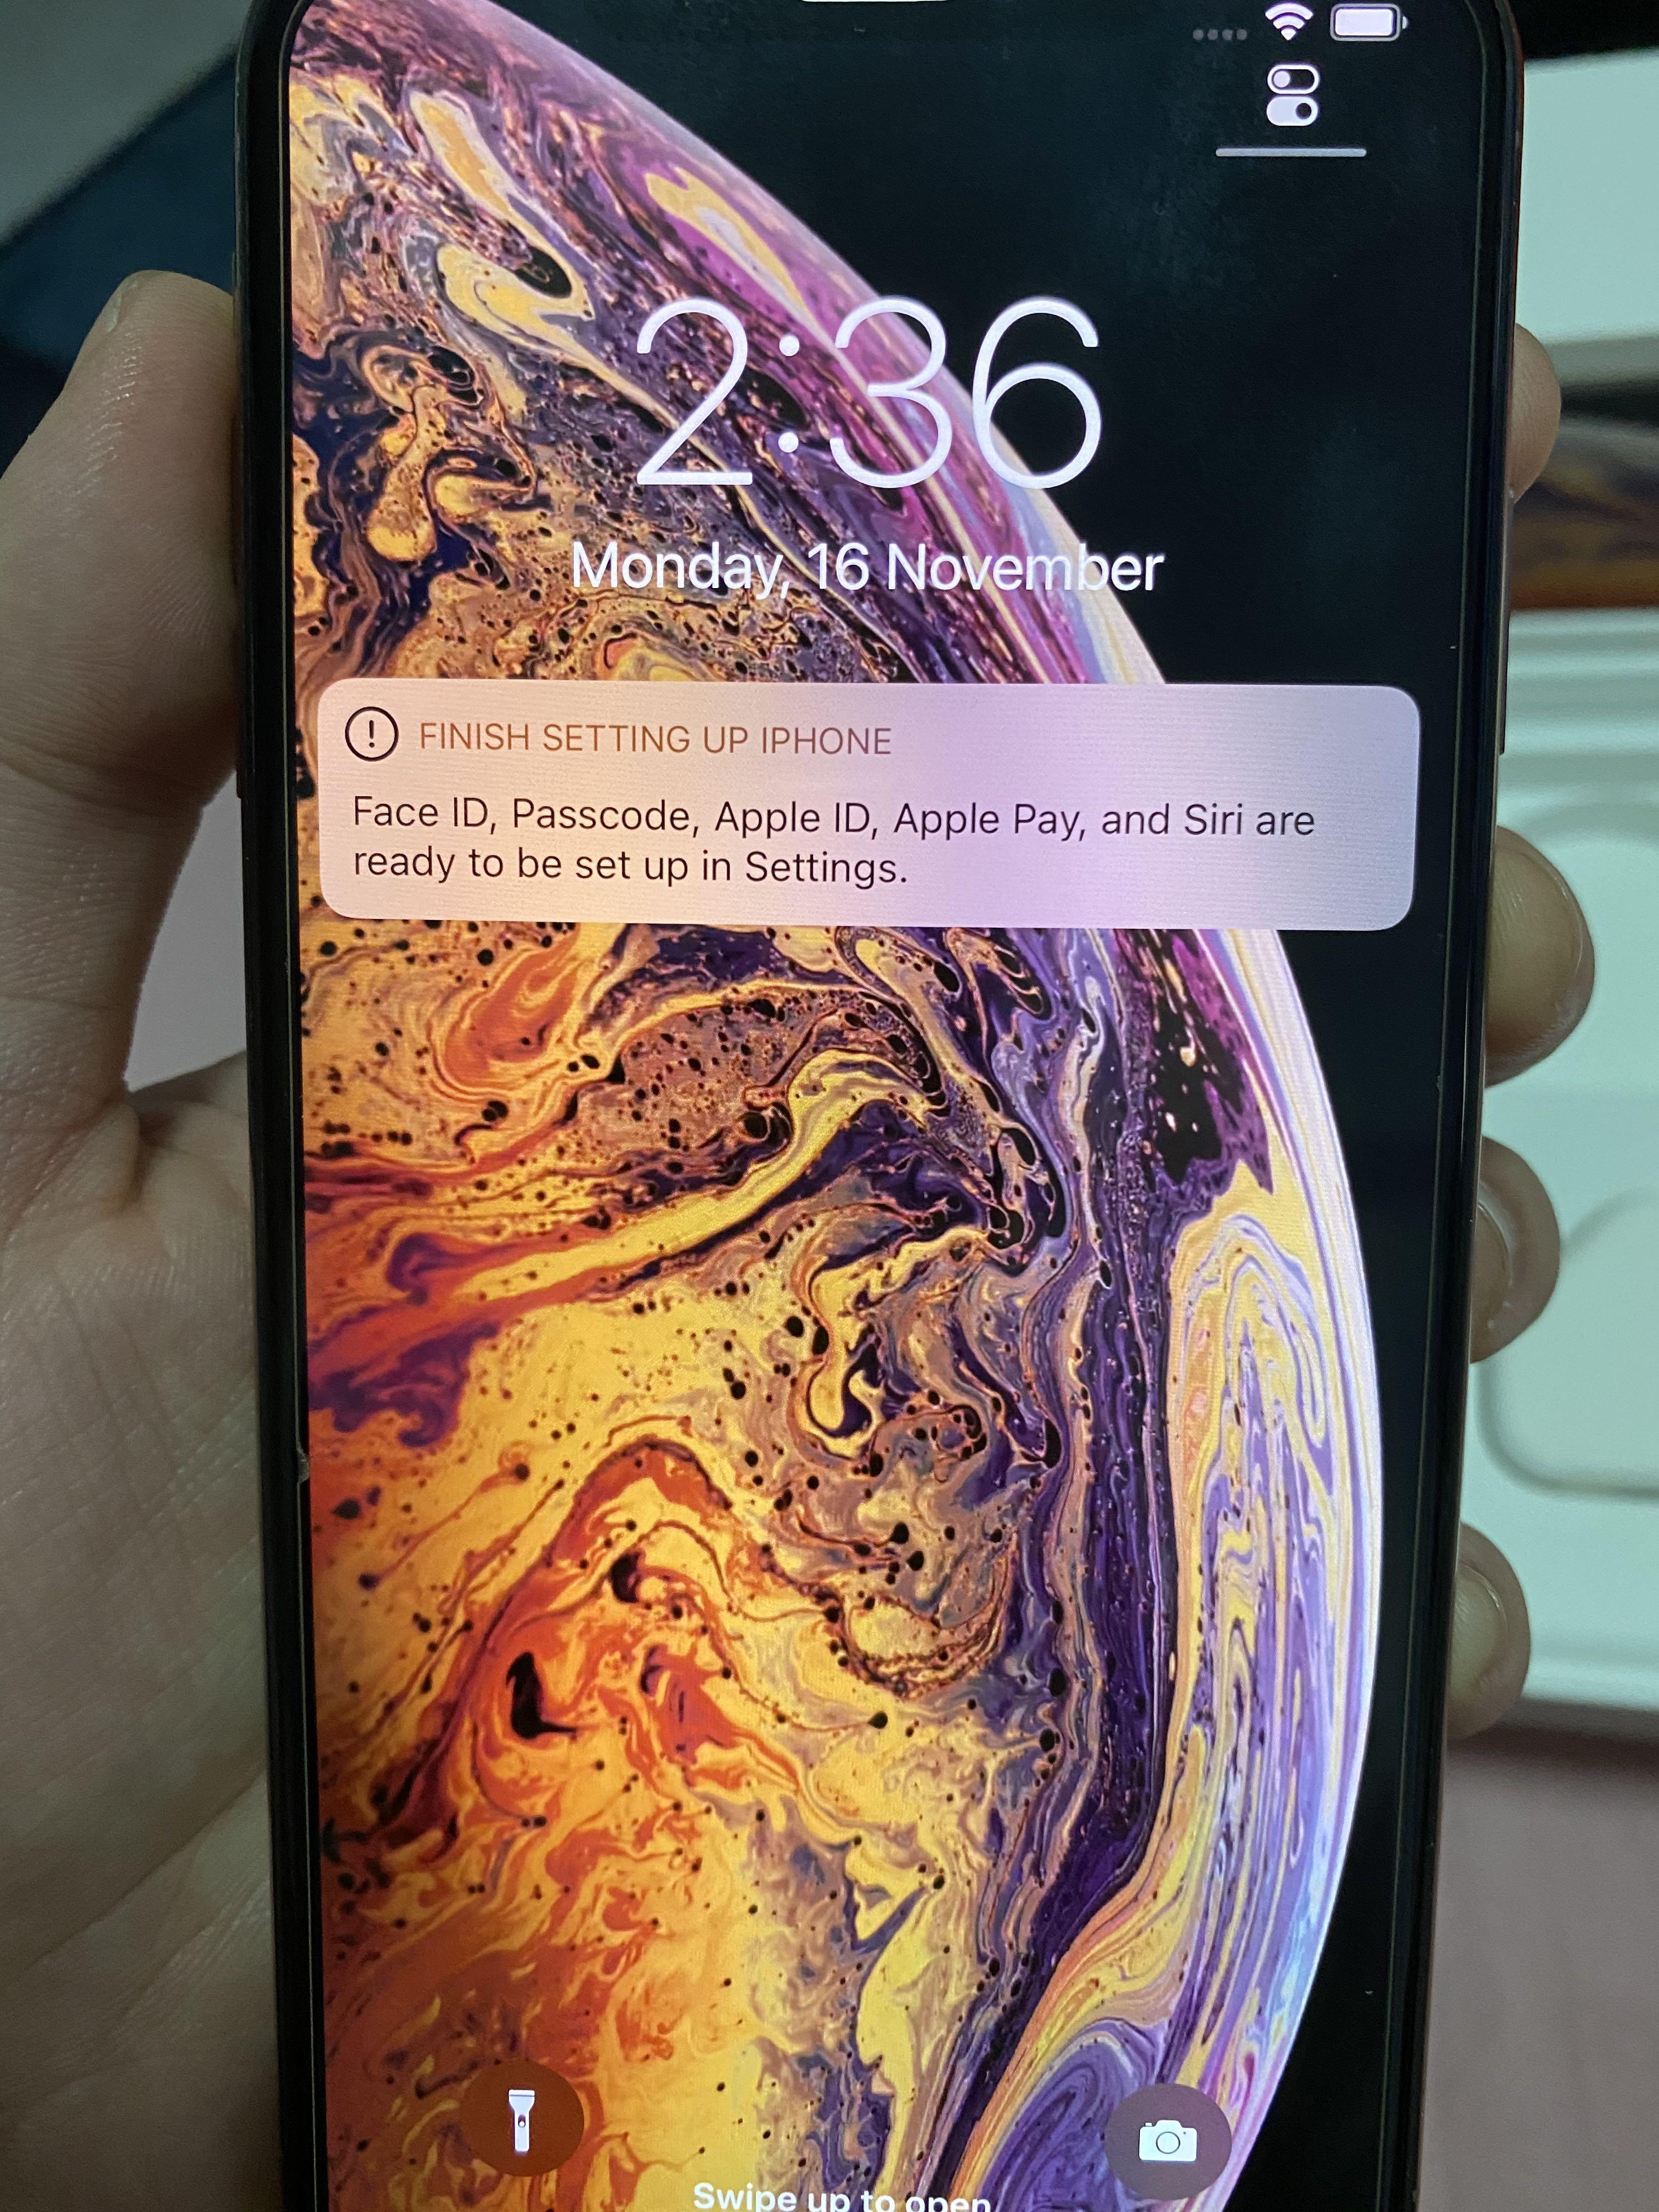 iPhone XS Max 265GB gold (gift provided)